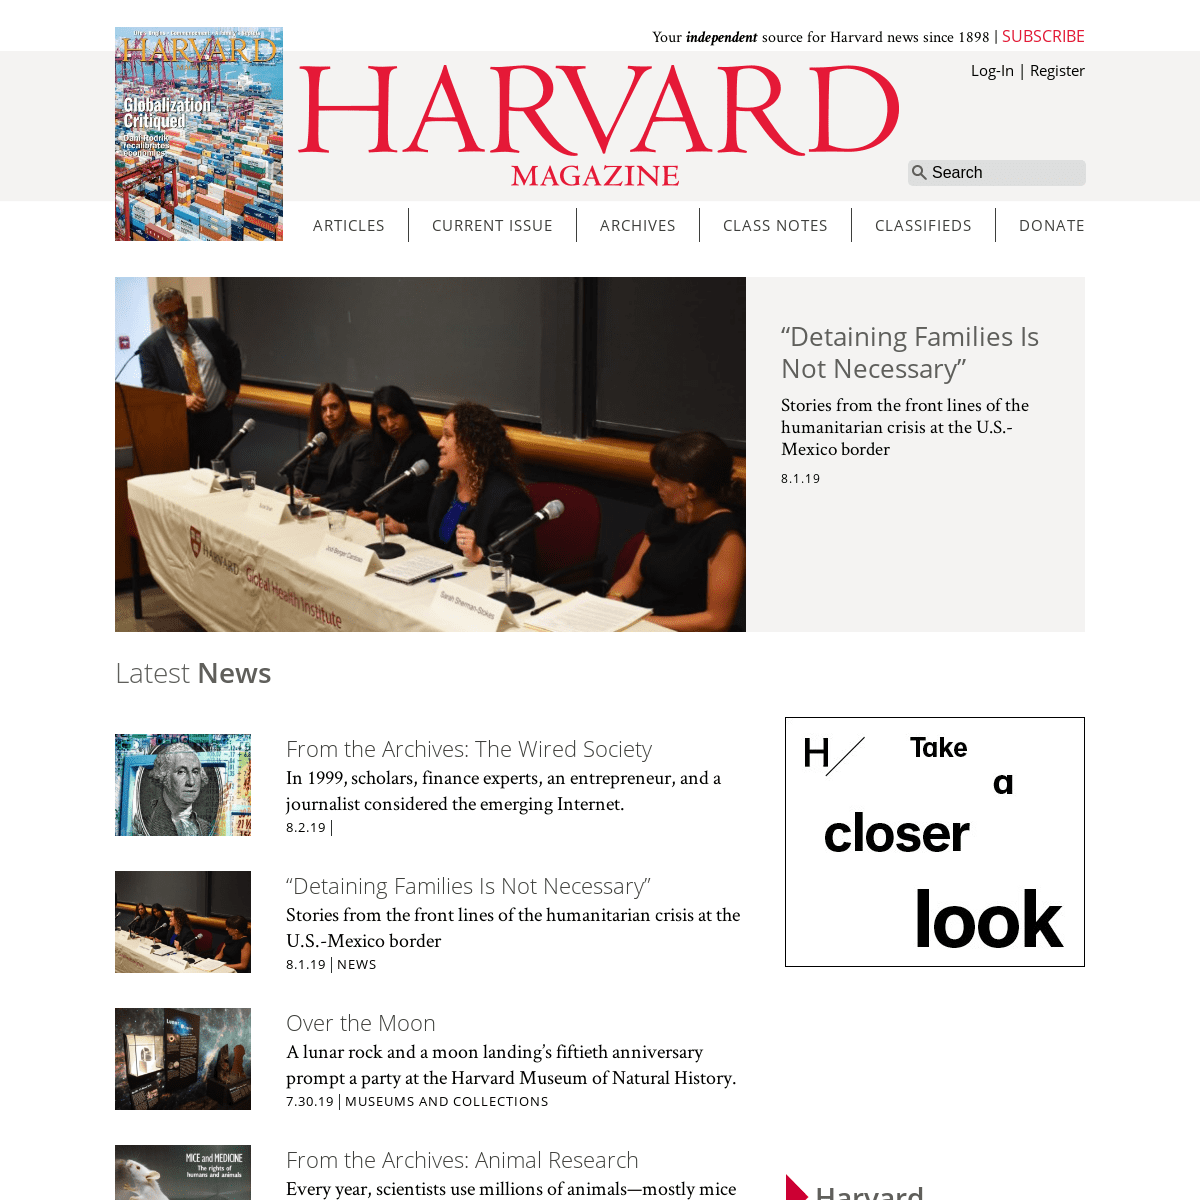 Harvard Magazine | Your editorially independent source for Harvard news, research, arts, and more.